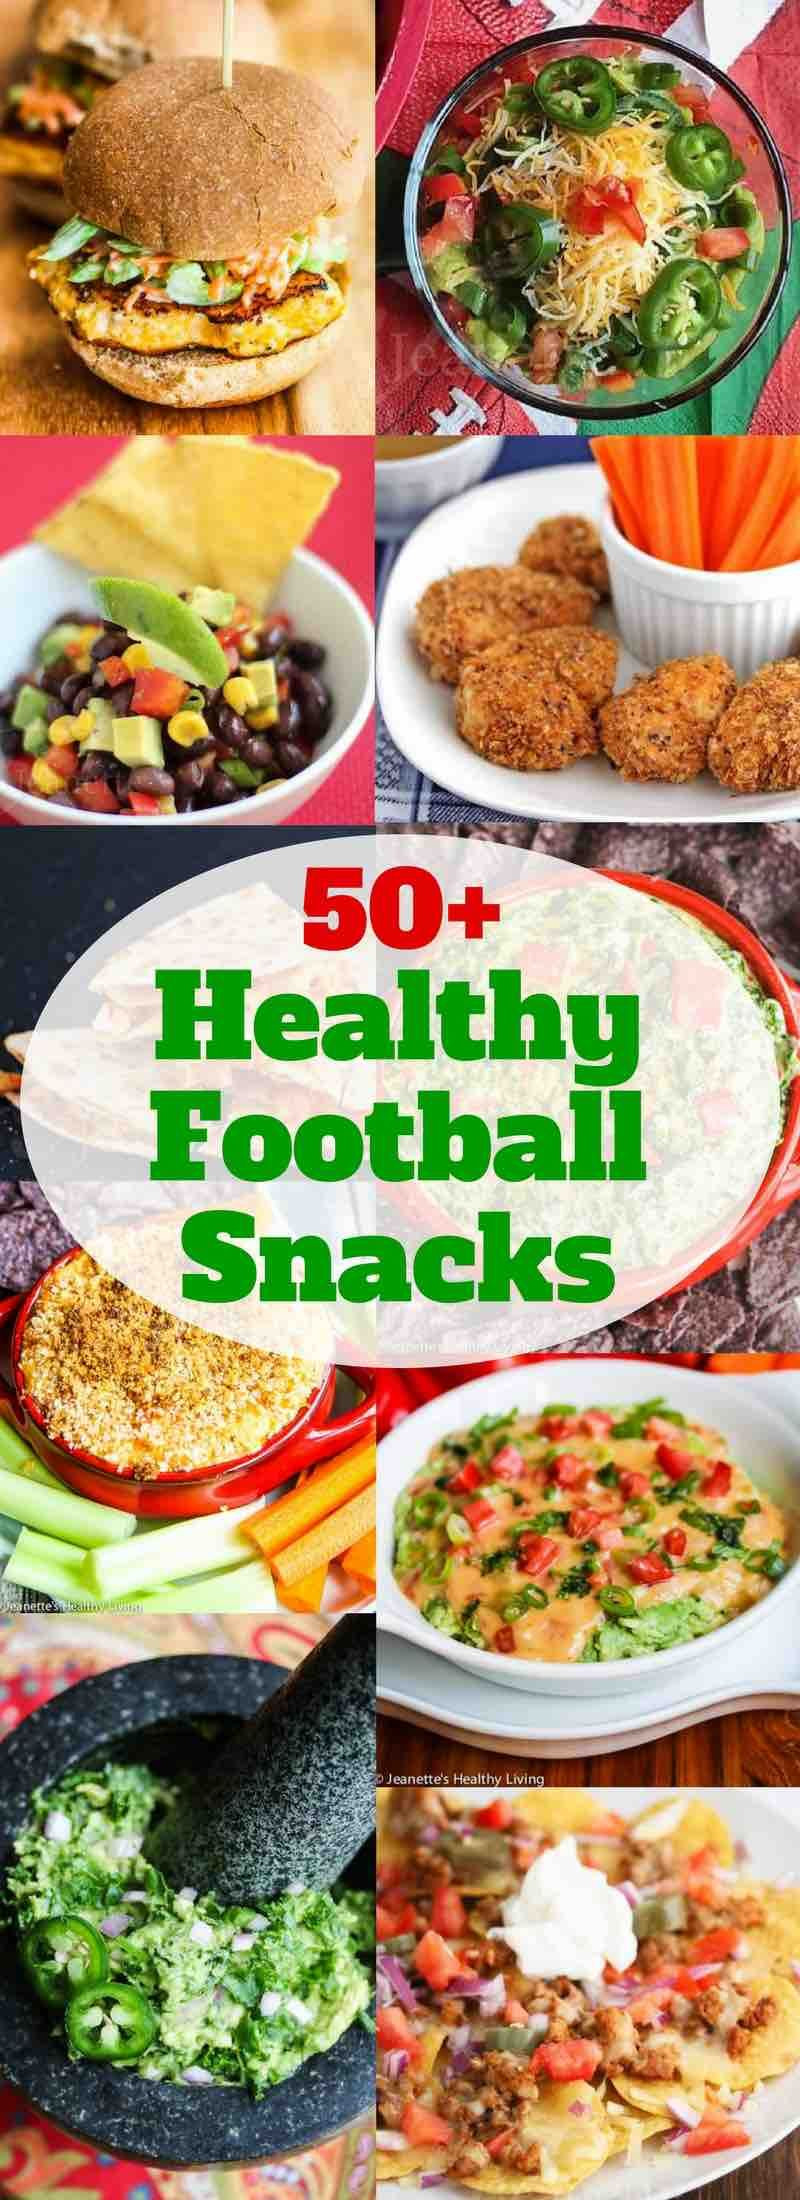 Healthy Football Appetizers
 50 Healthy Football Snacks